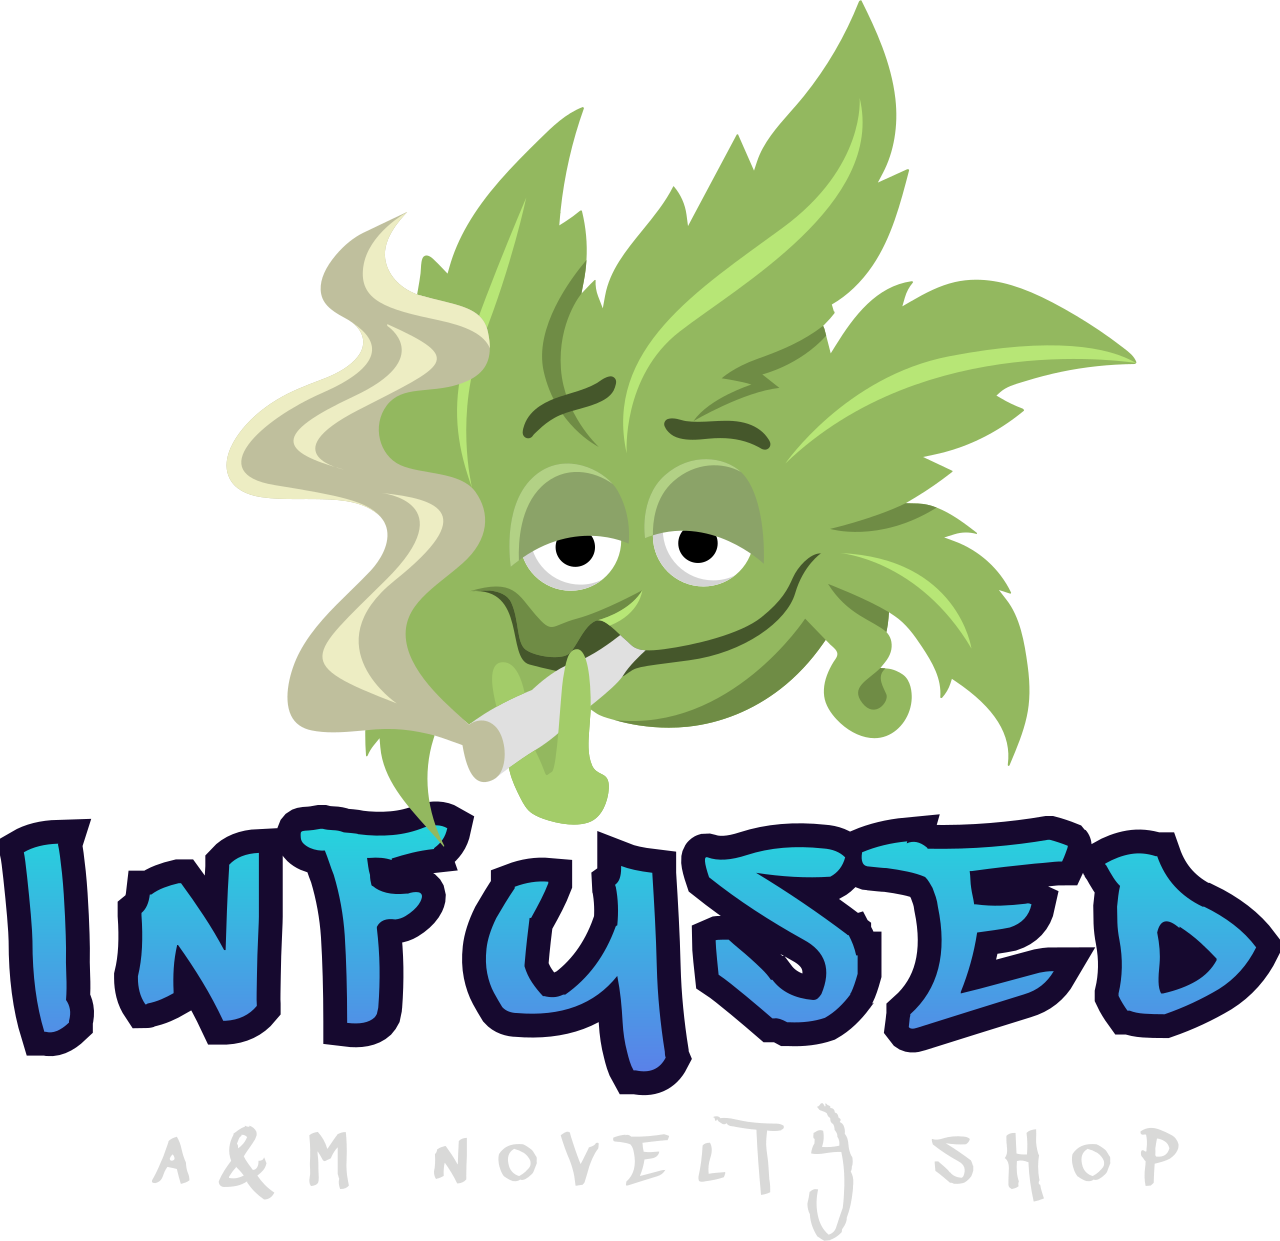 Infused's logo